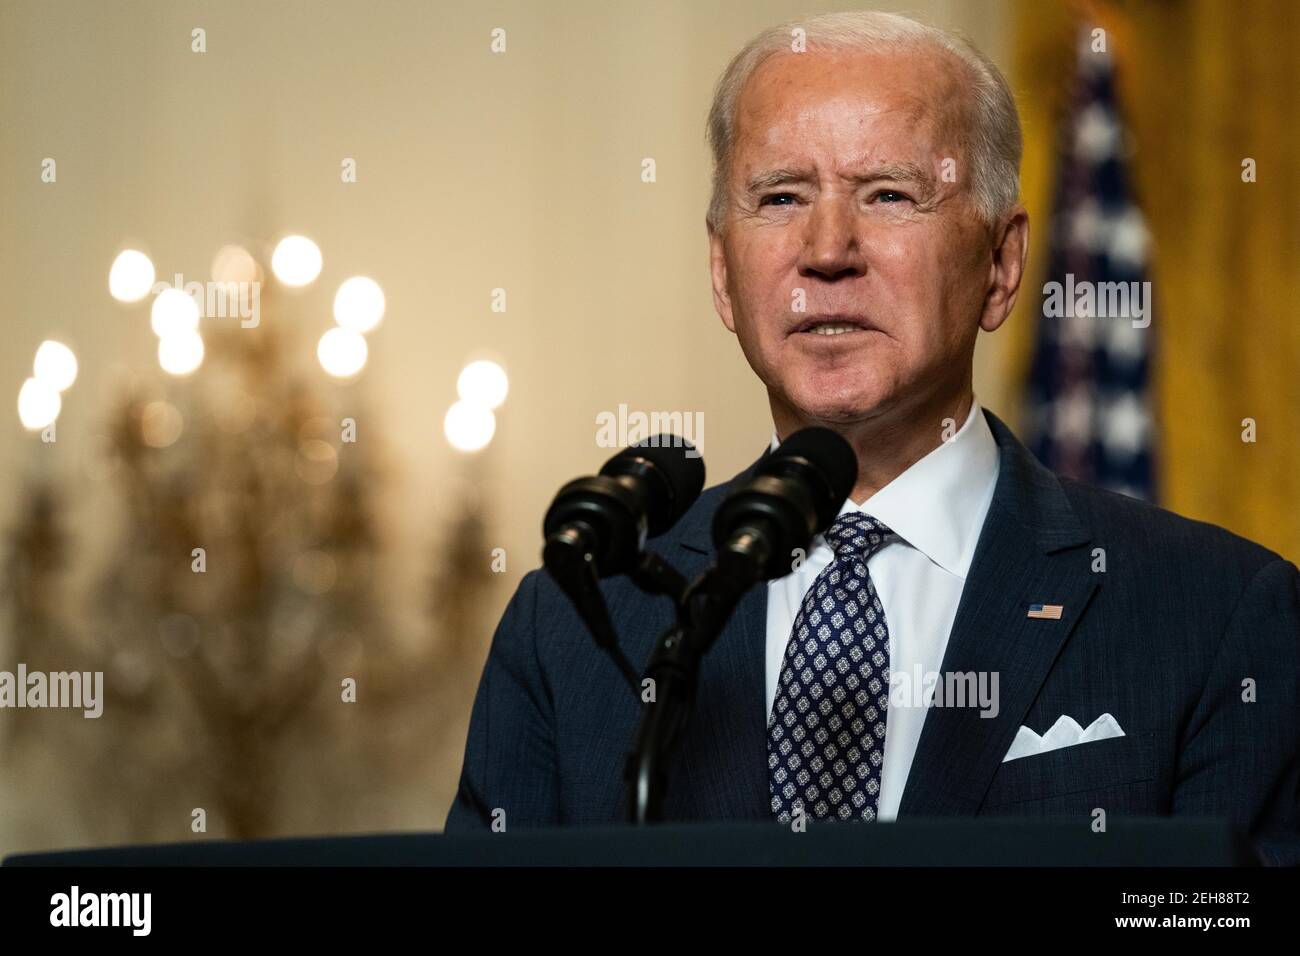 President Joe Biden delivers remarks at a virtual event hosted by the ...